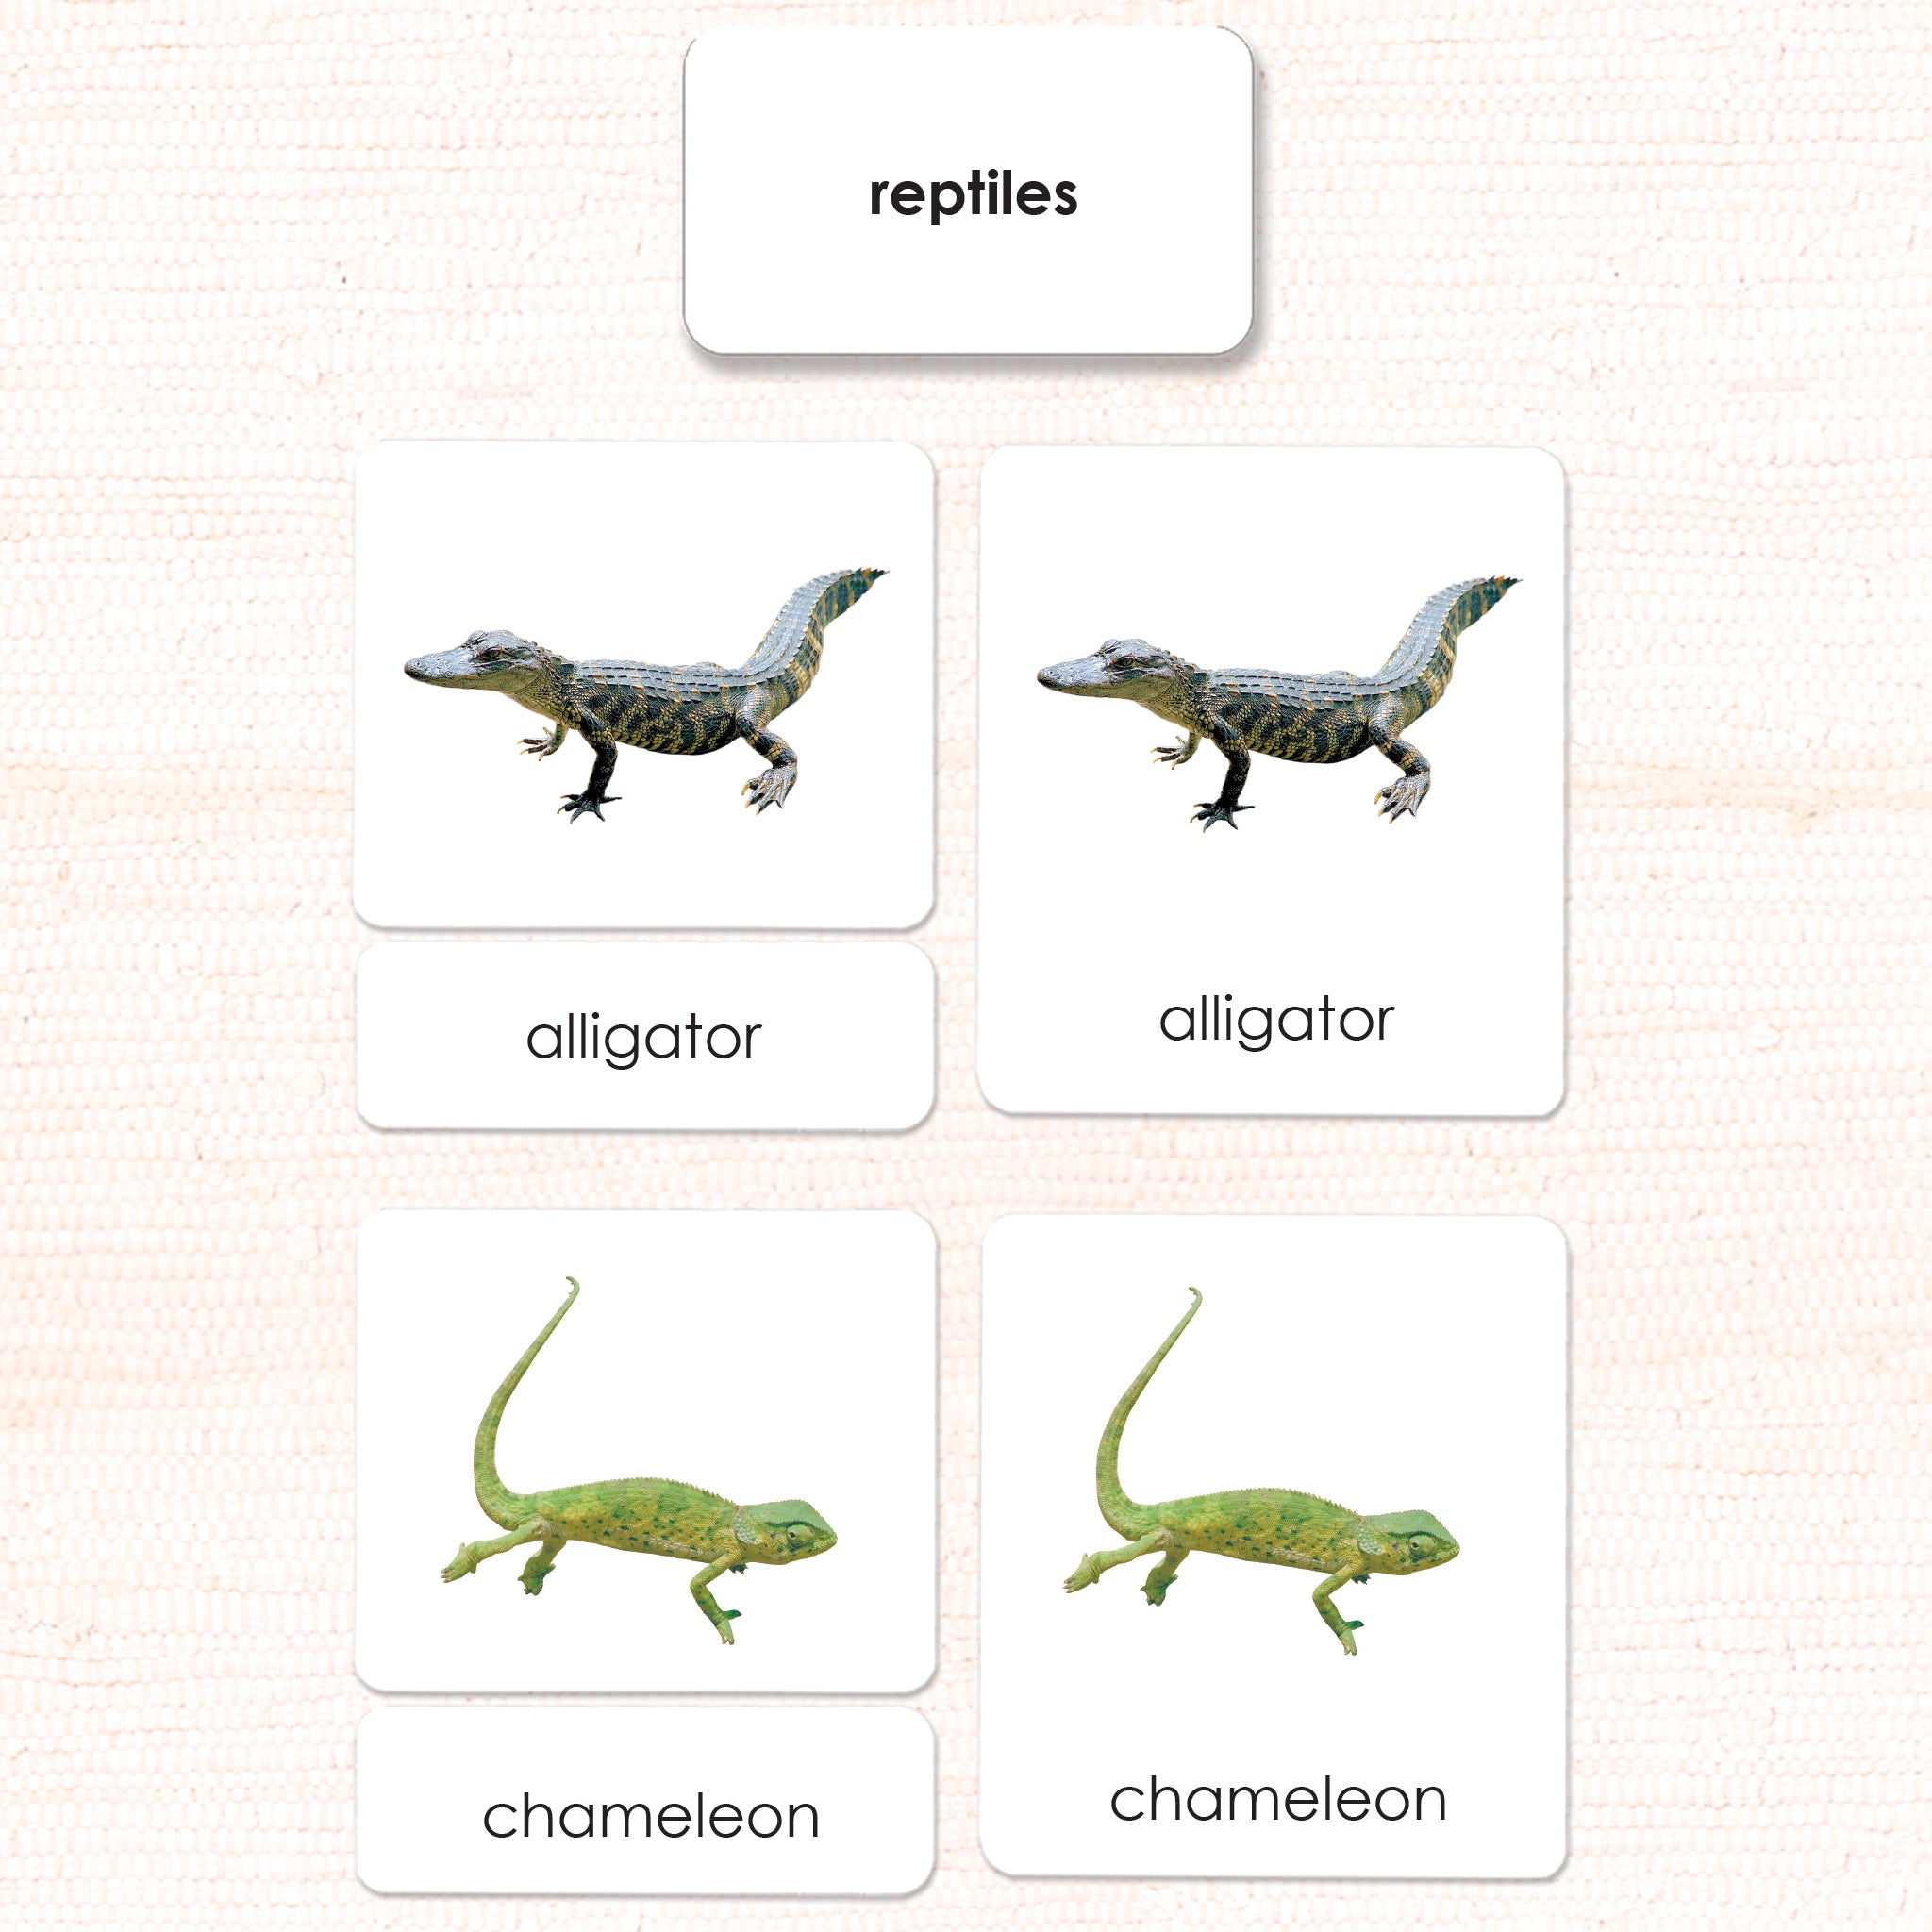 Imperfect Reptiles 3-Part Reading